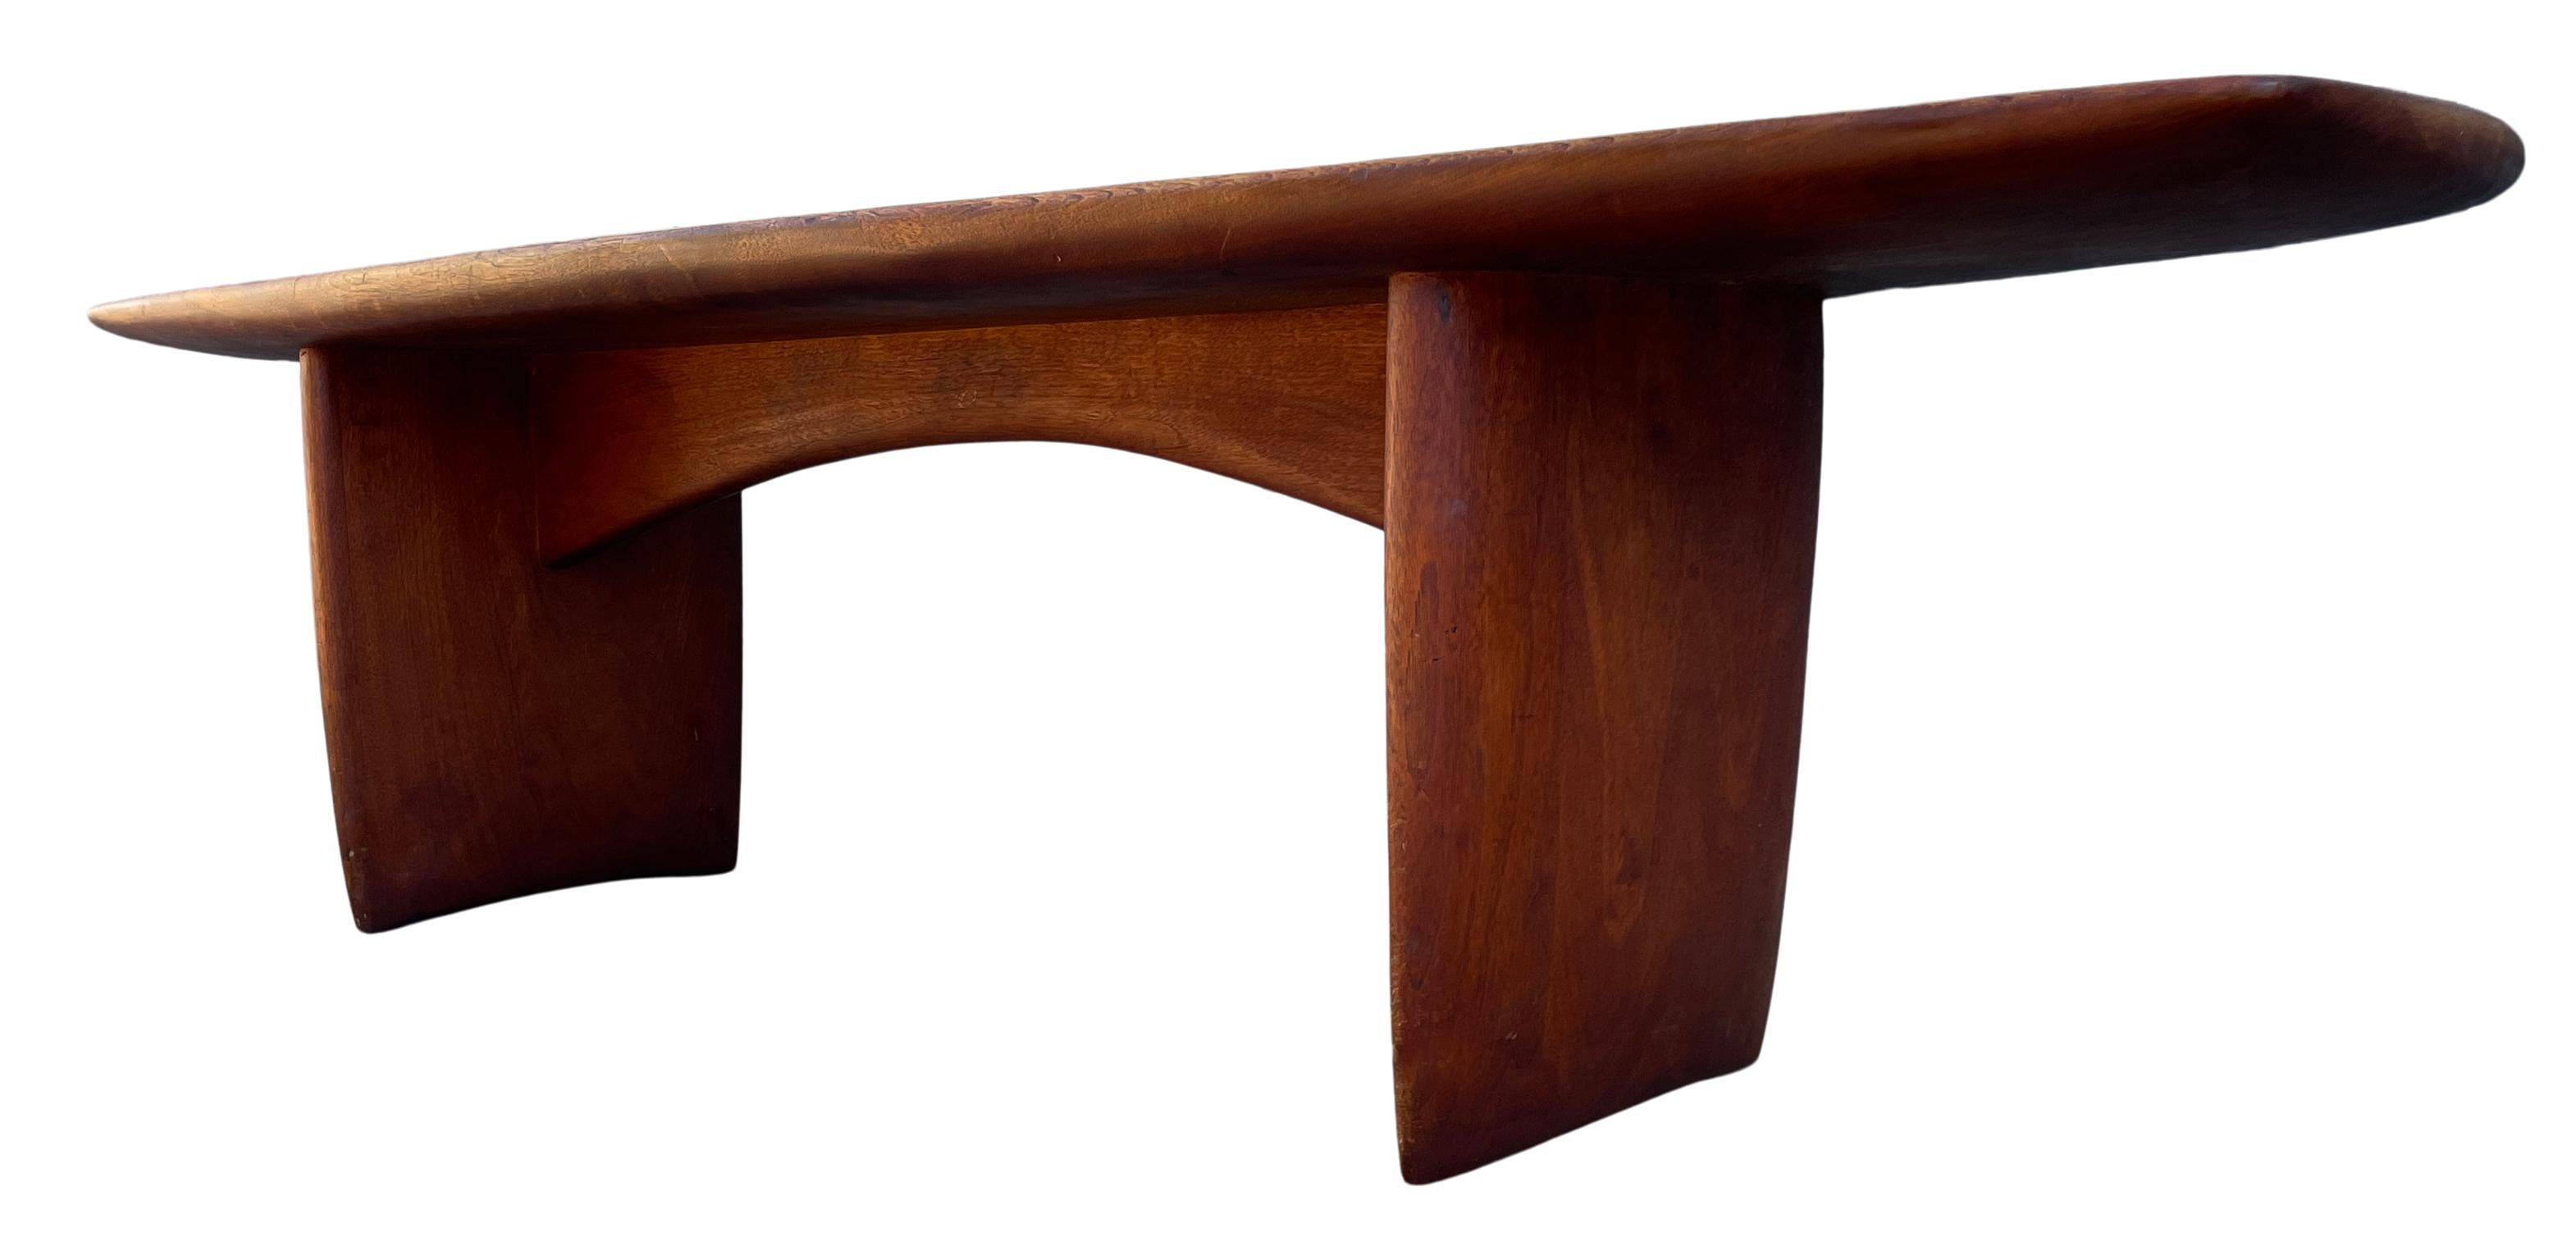 Unknown Mid-Century Modern Studio Craft Woodworker Solid Wood Coffee Table or Bench 1963 For Sale